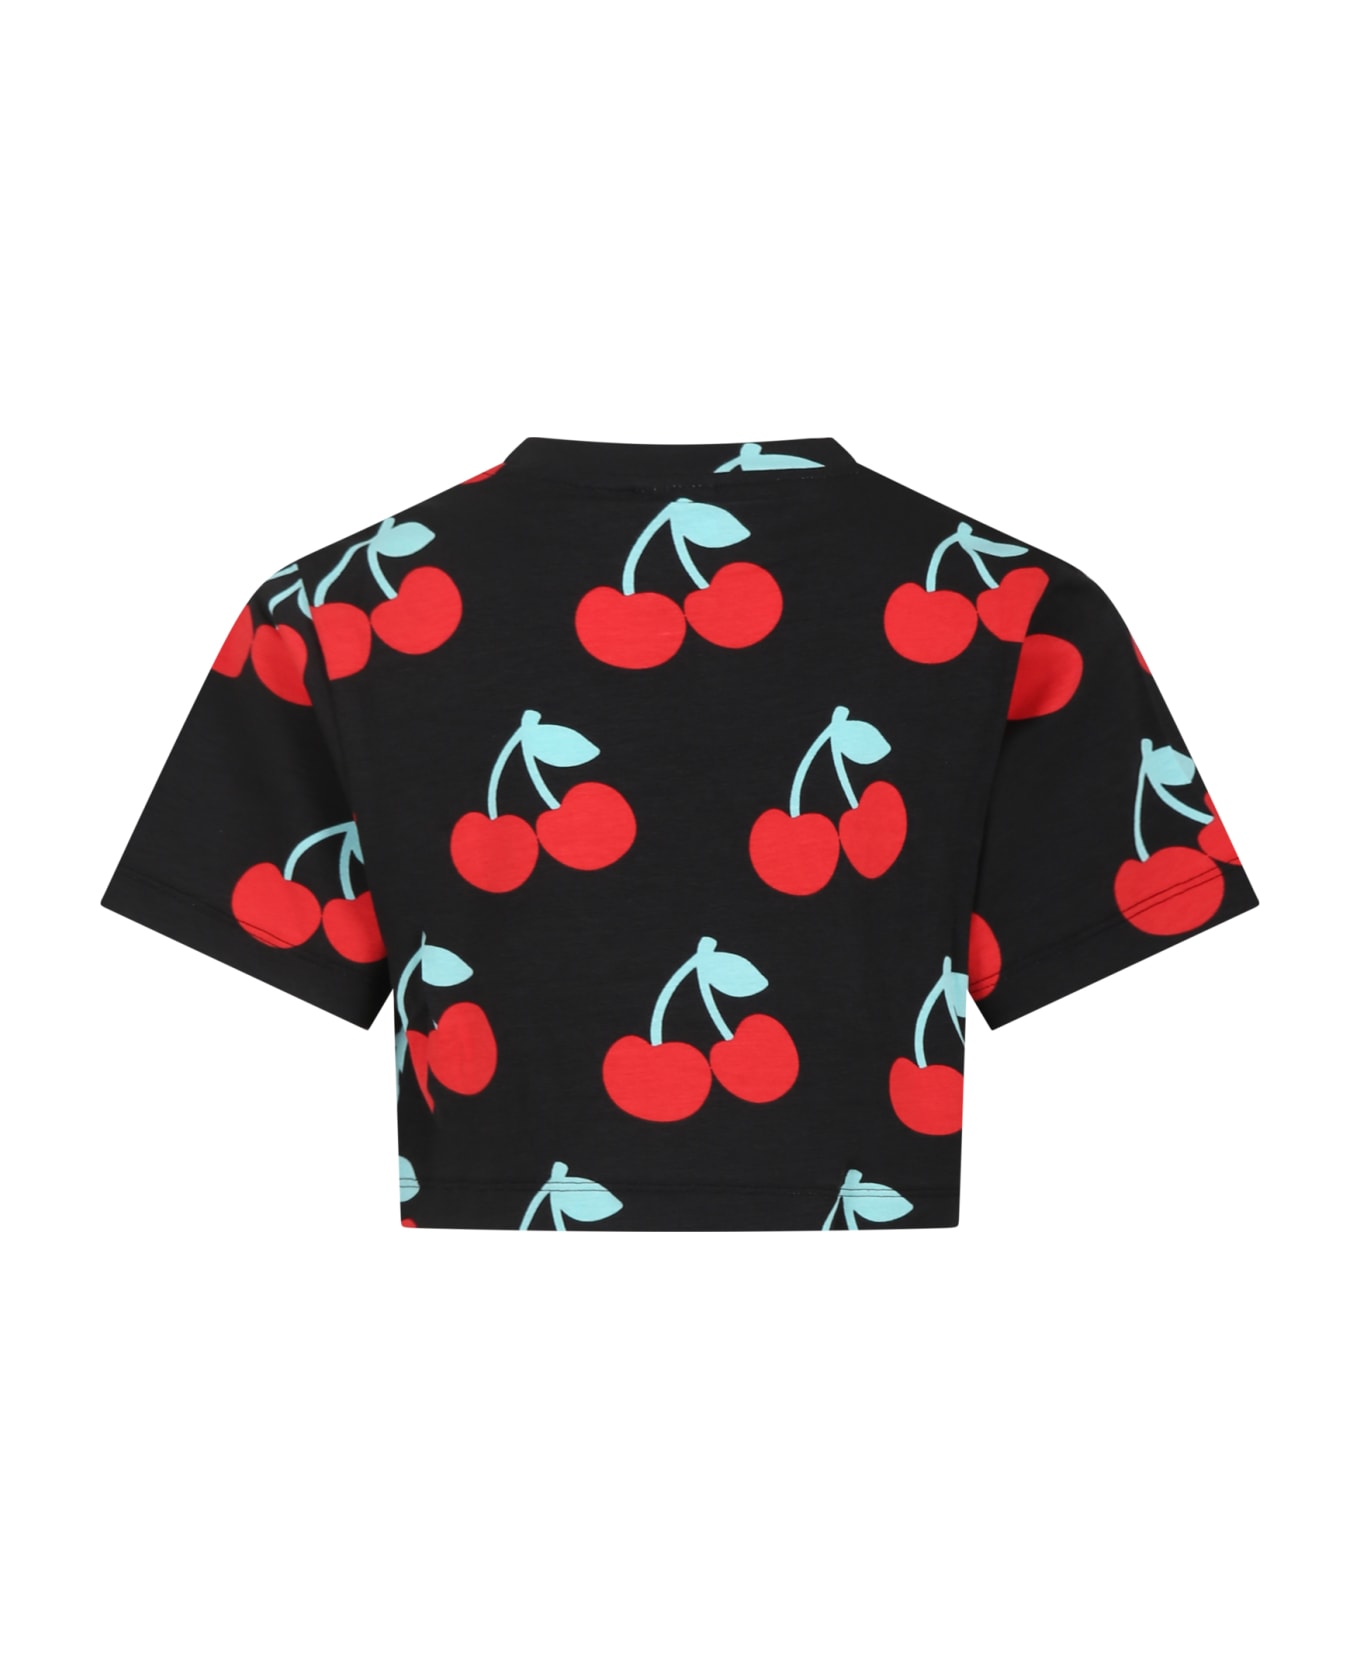 GCDS Mini Black T-shirt For Girl With All-over Cherry Print - Black